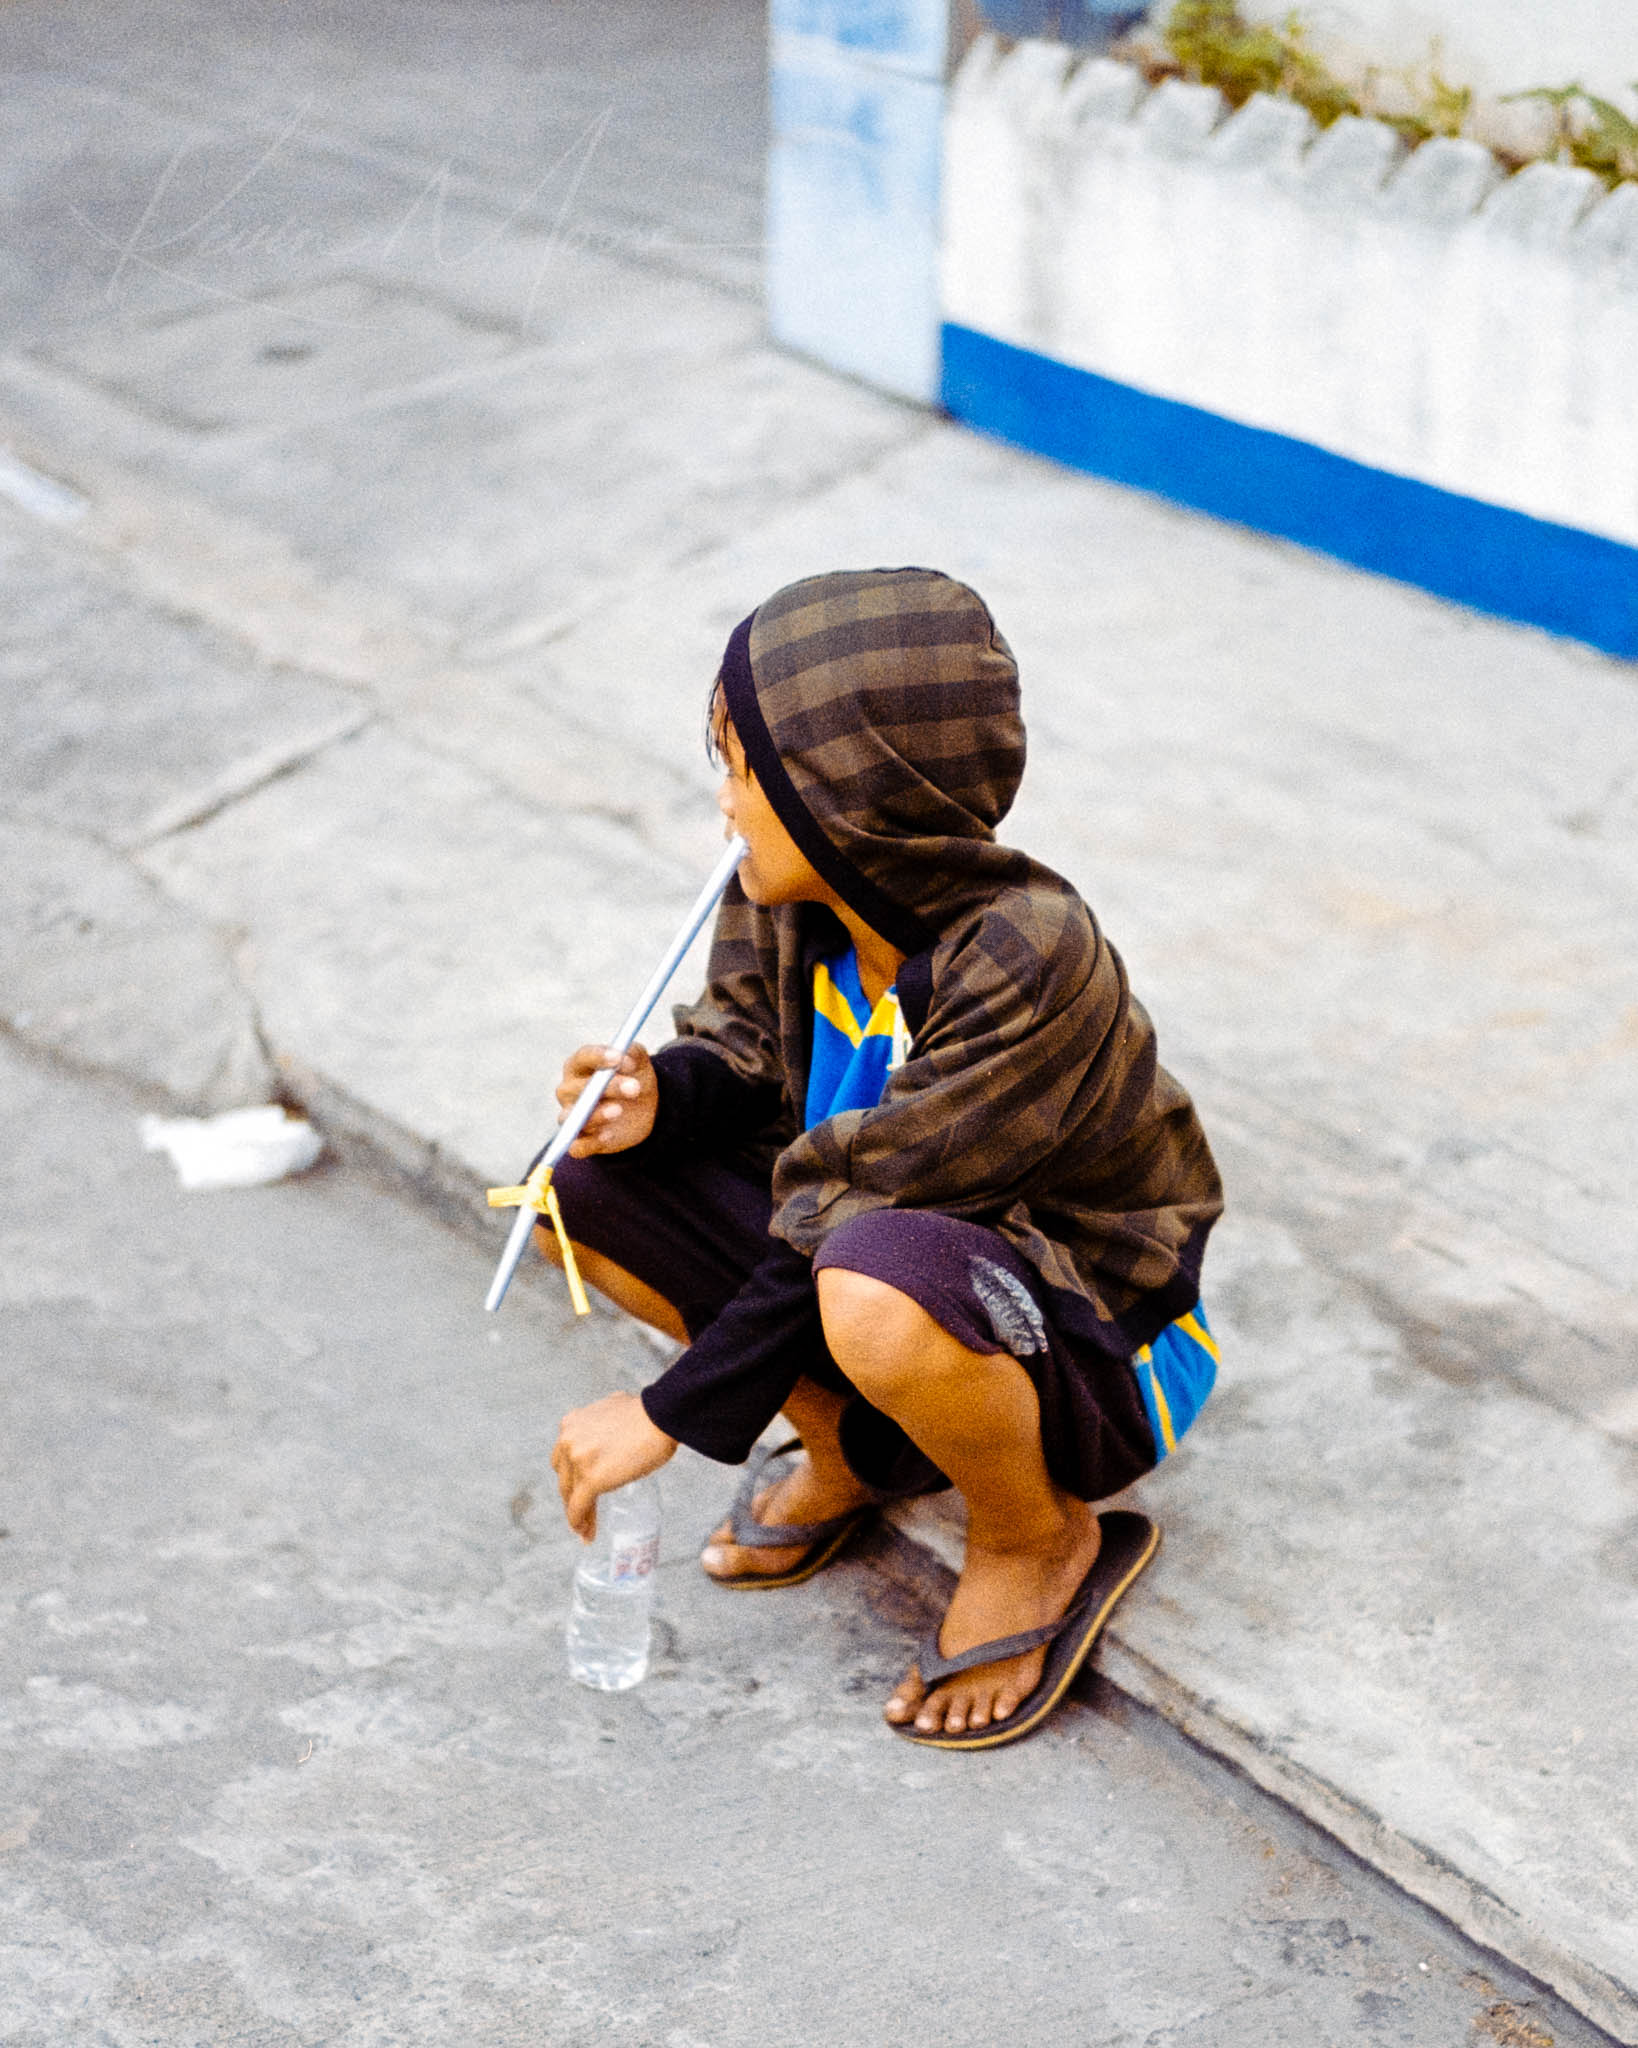 Individual in colorful attire sipping drink on urban sidewalk in thoughtful solitude.